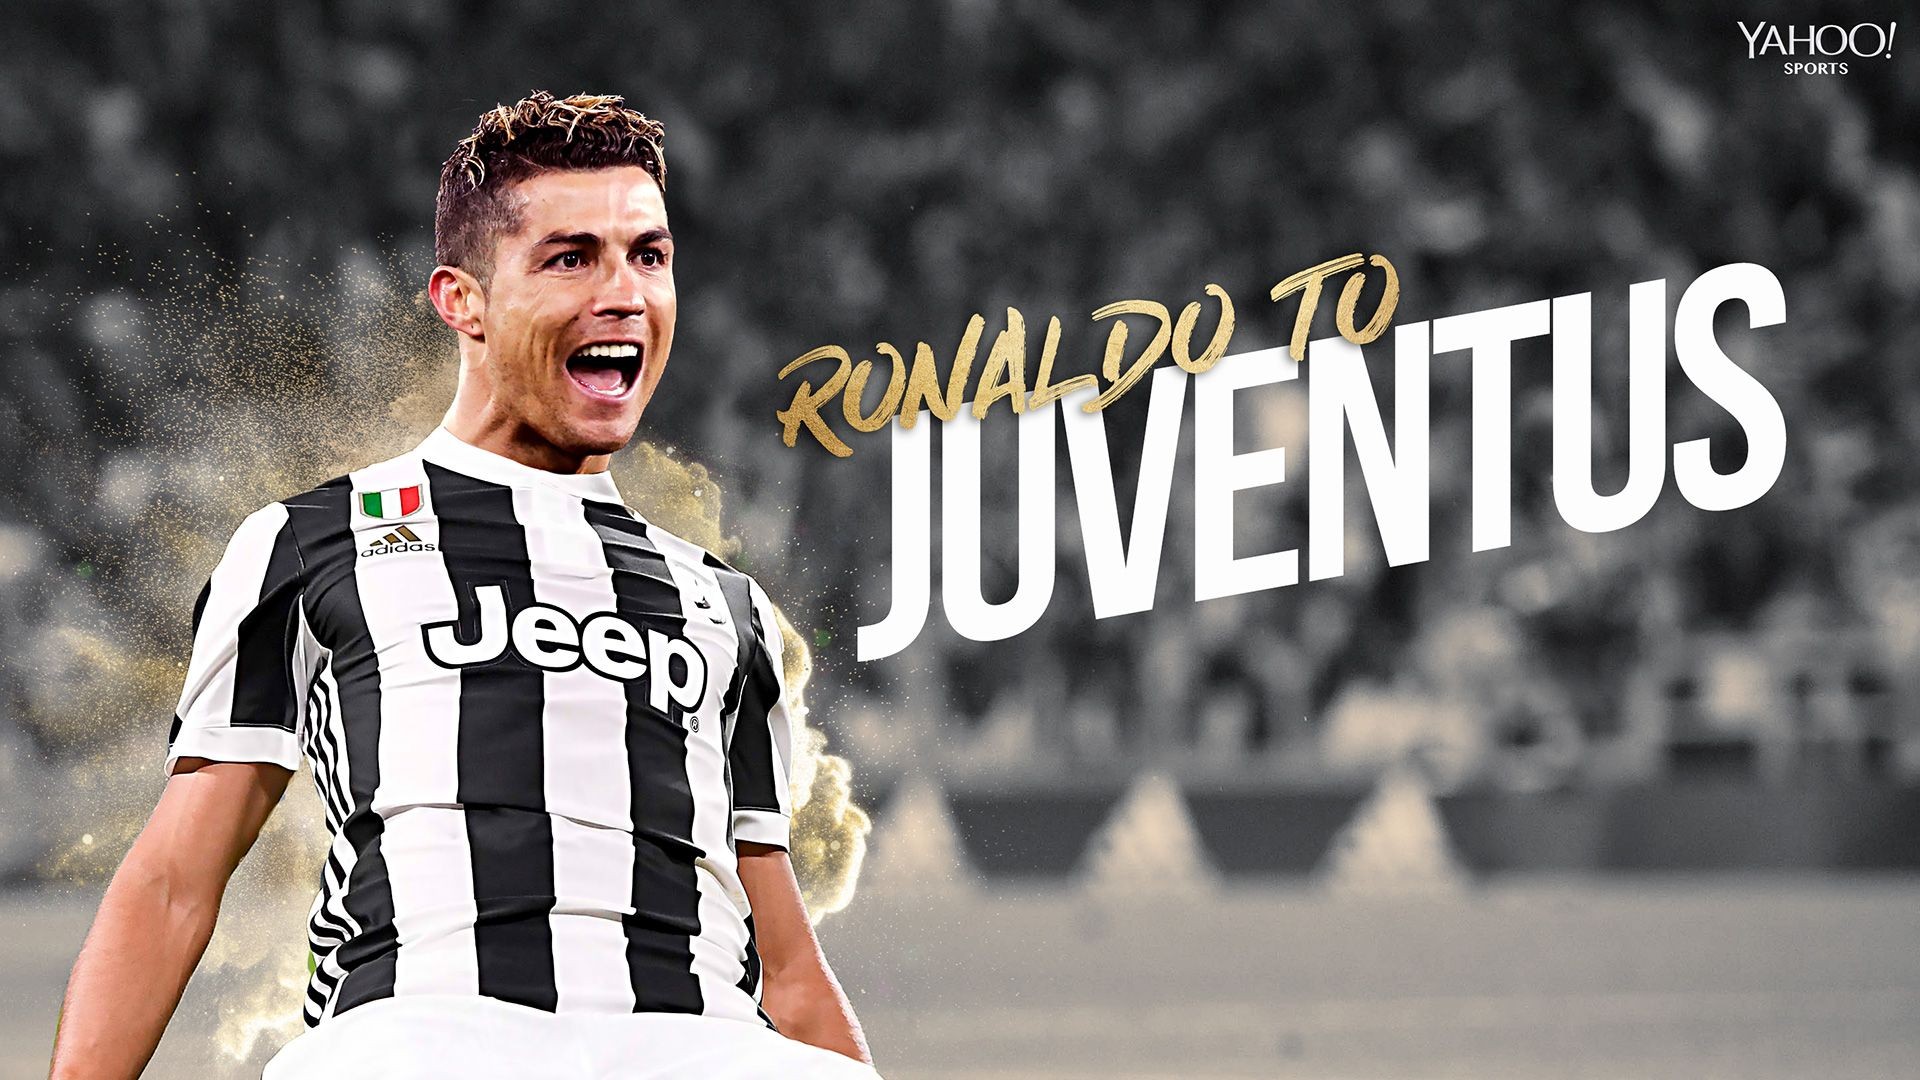 Wallpaper CR7 Juventus with image resolution 1920x1080 pixel. You can use this wallpaper as background for your desktop Computer Screensavers, Android or iPhone smartphones